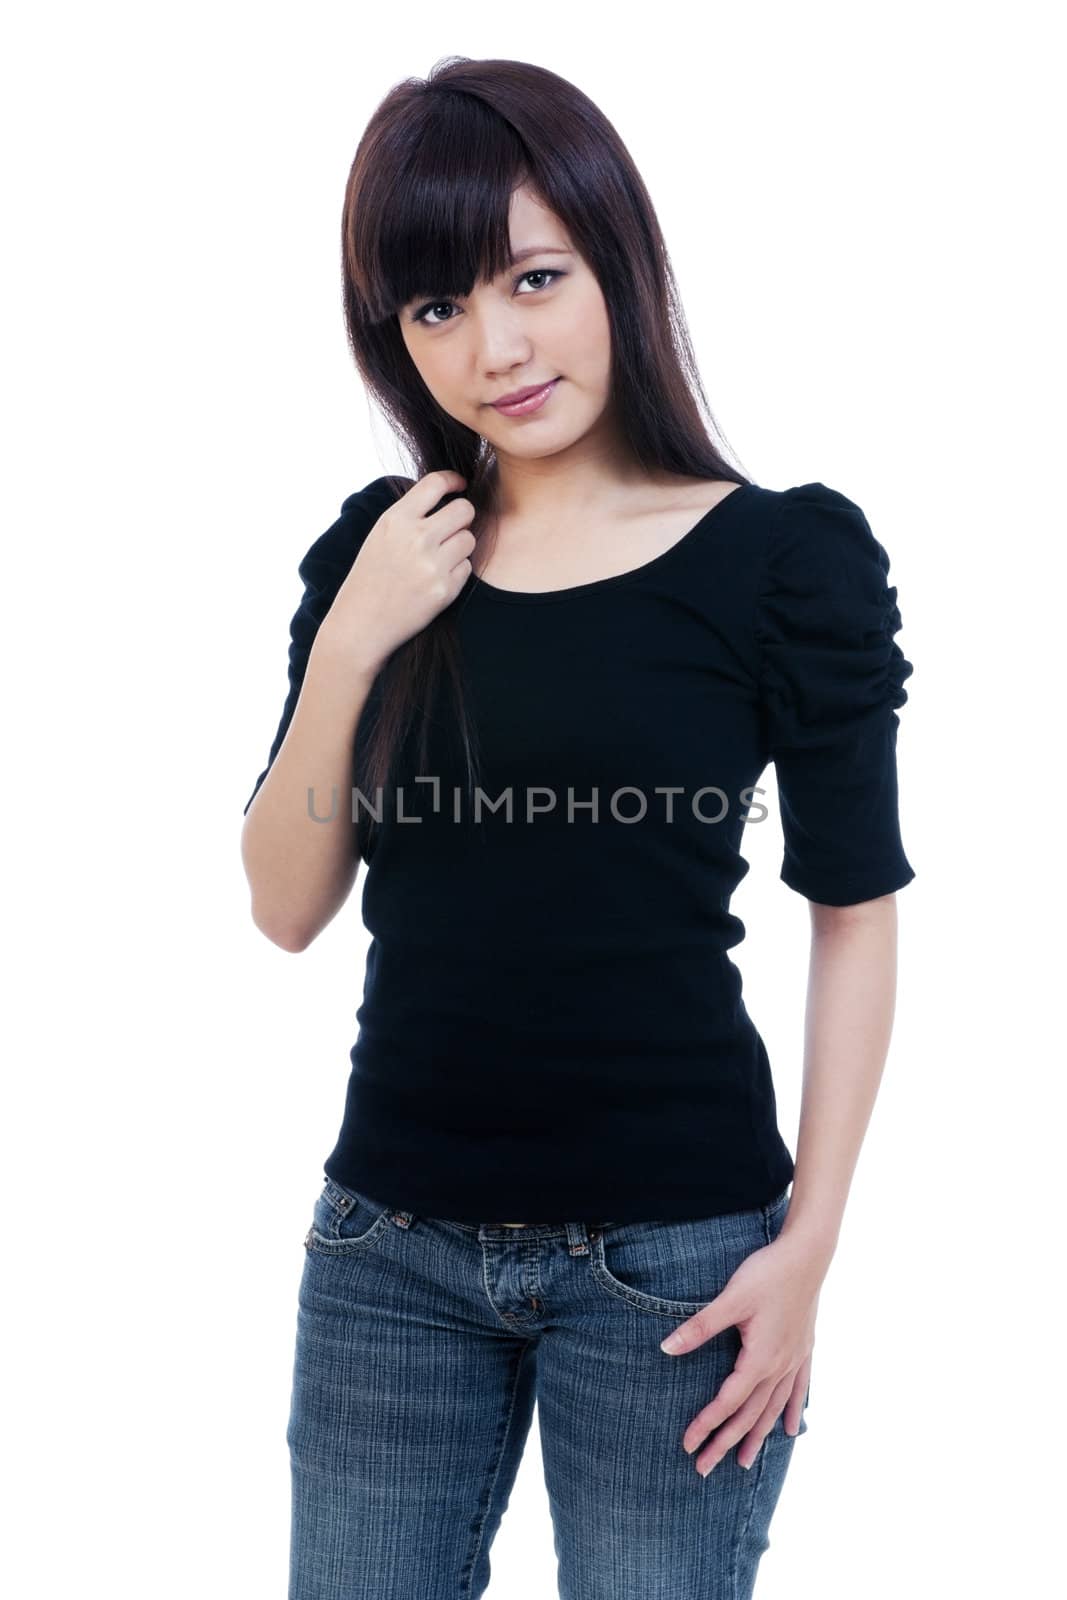 Portrait of a casual young Asian woman posing over white background.